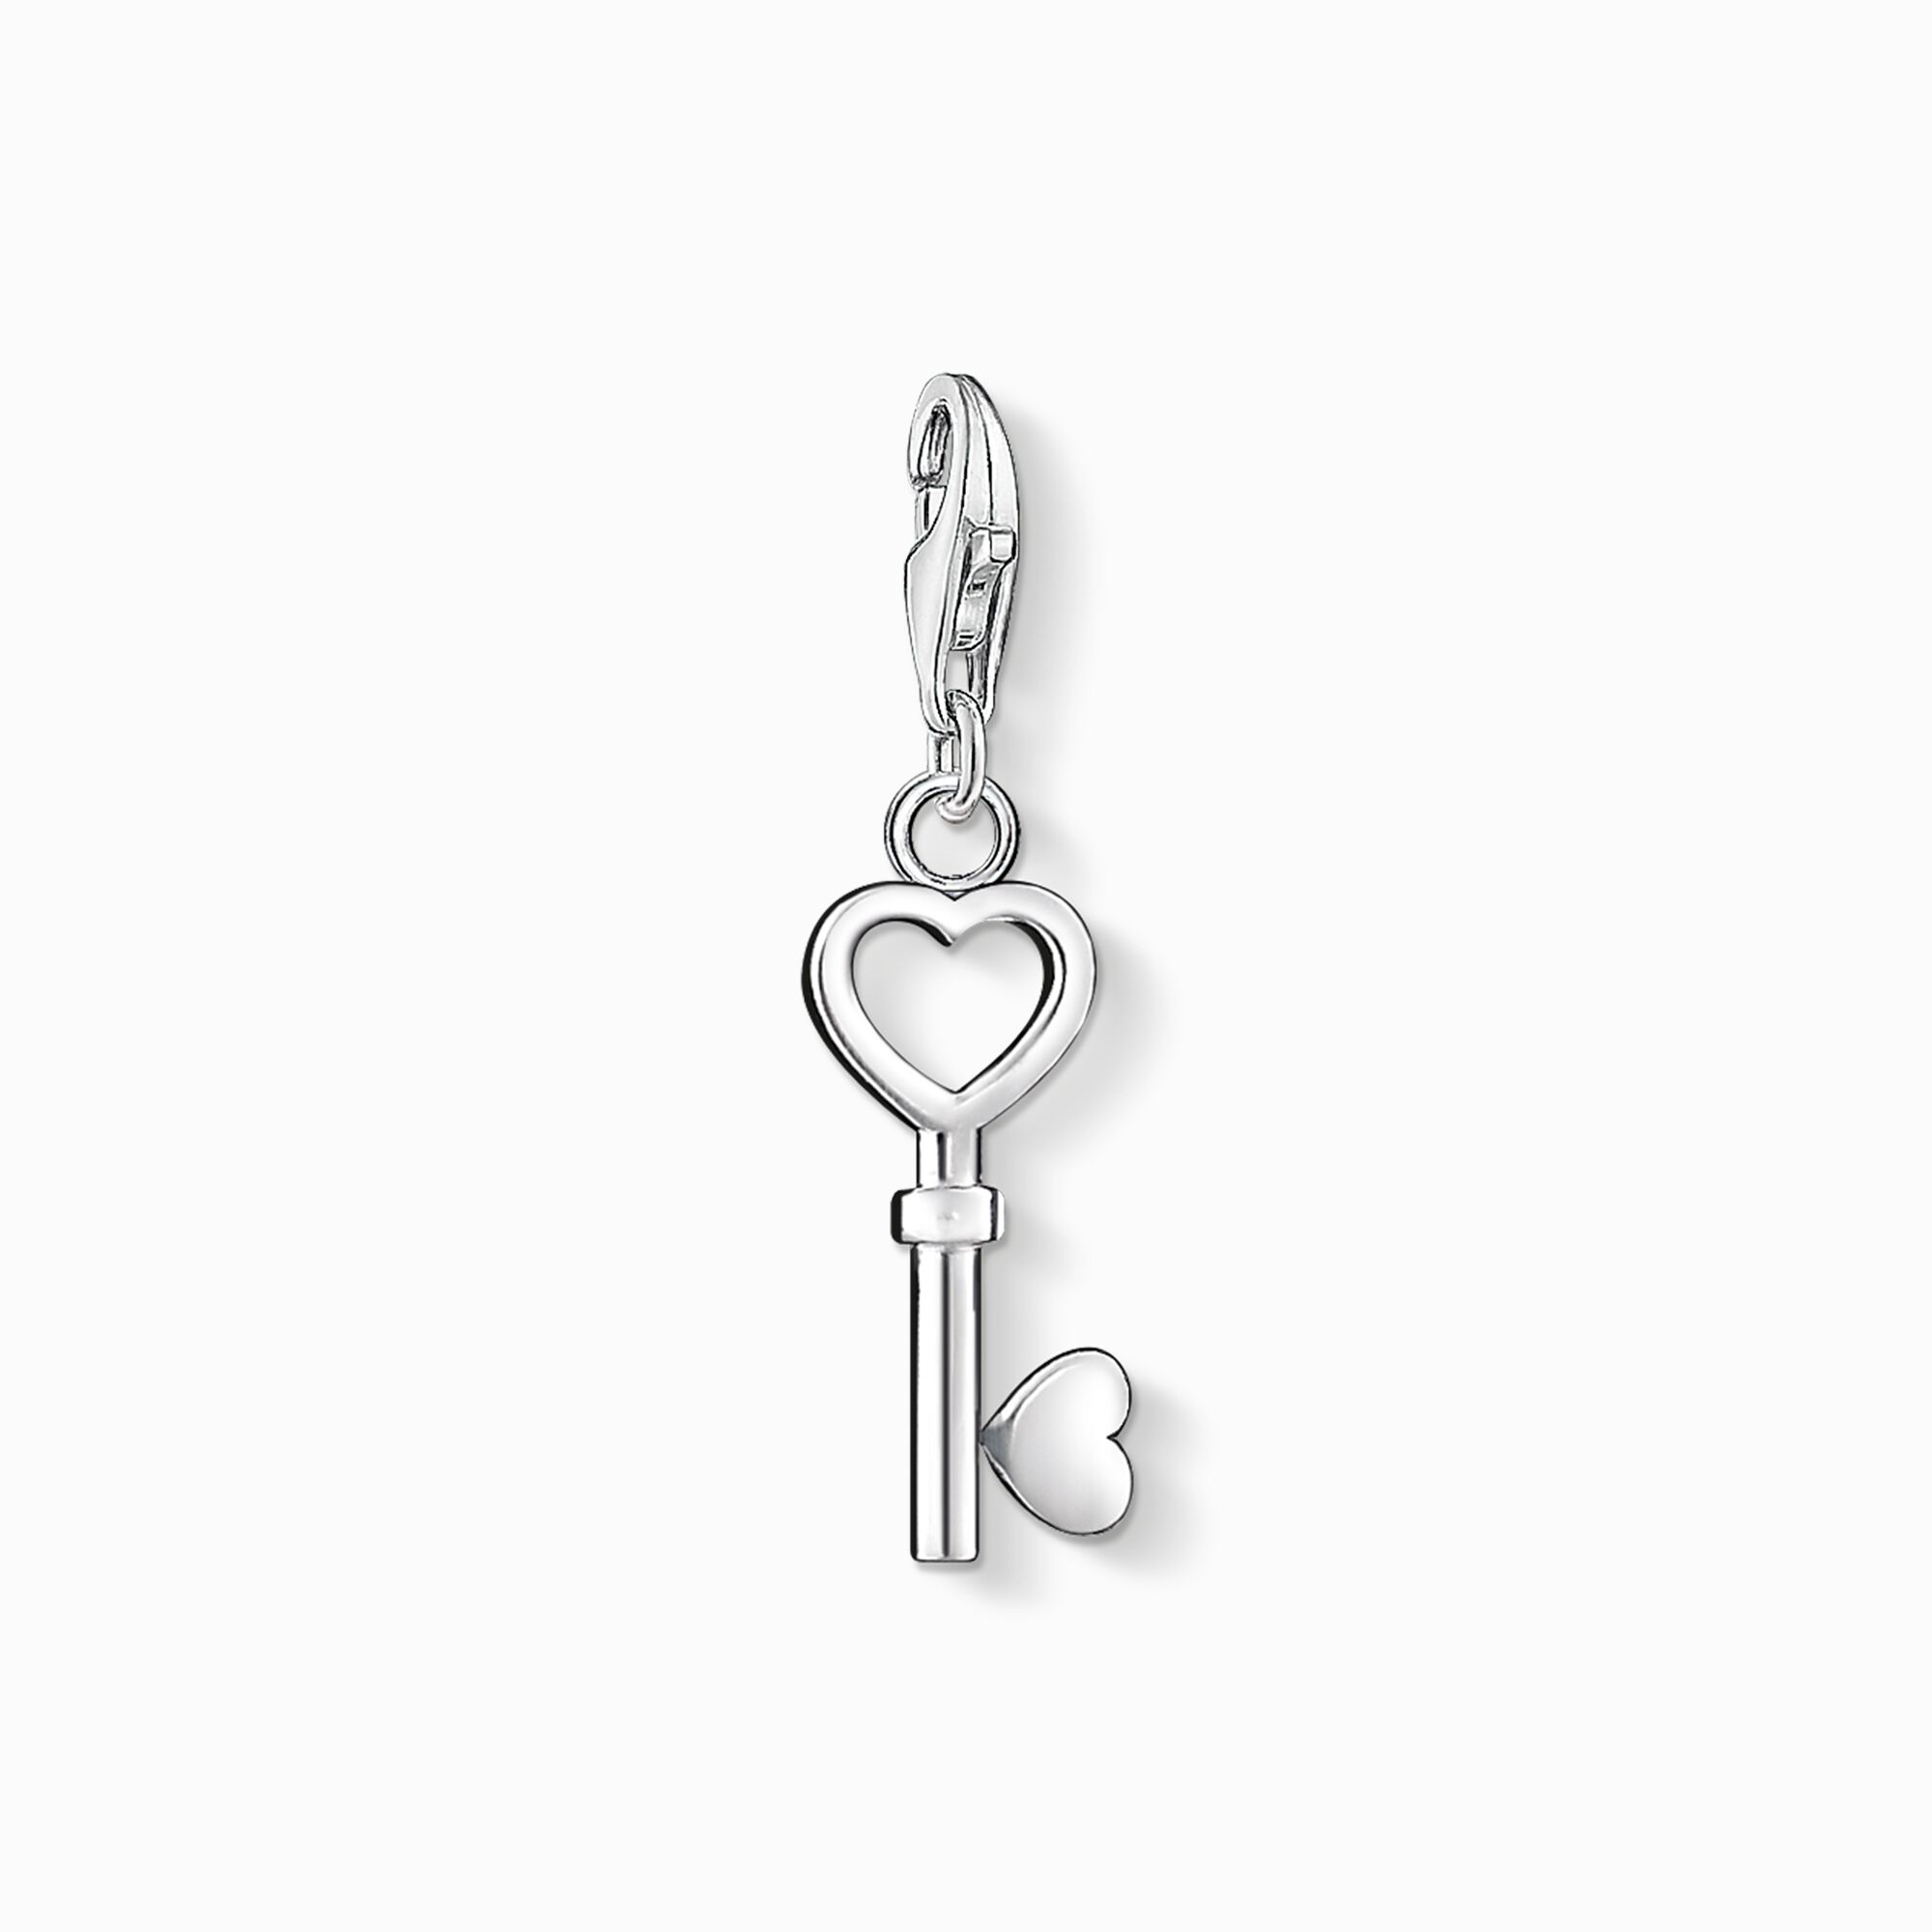 Charm pendant key from the Charm Club collection in the THOMAS SABO online store